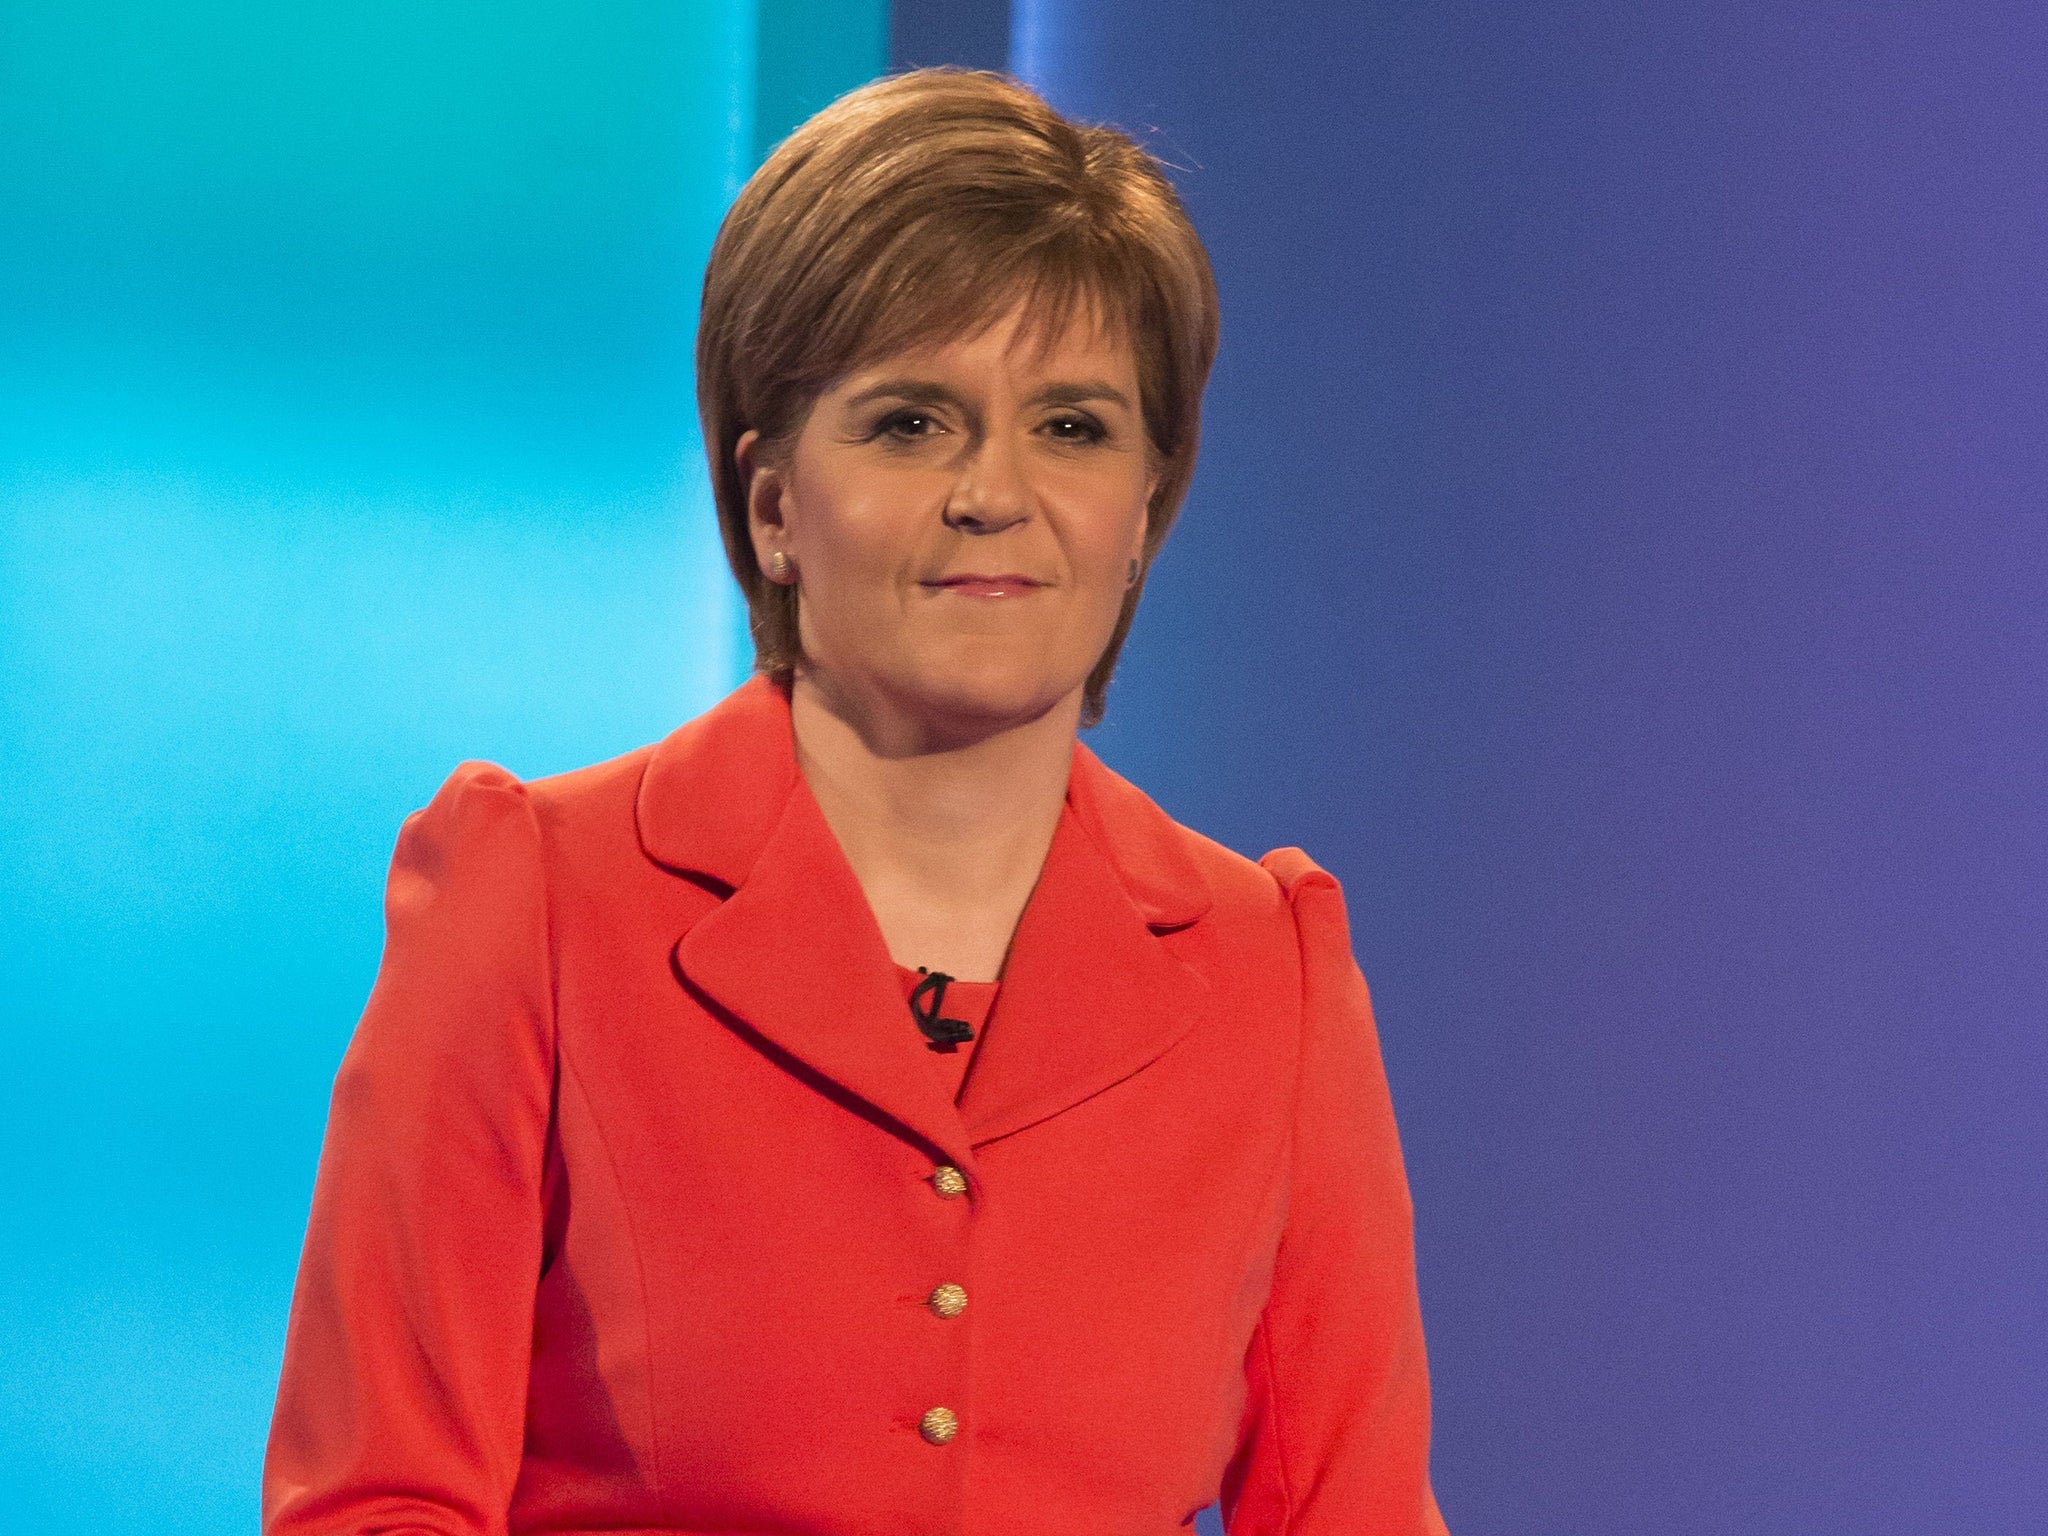 An average of three snap polls following the debate handed a slim victory to Nicola Sturgeon